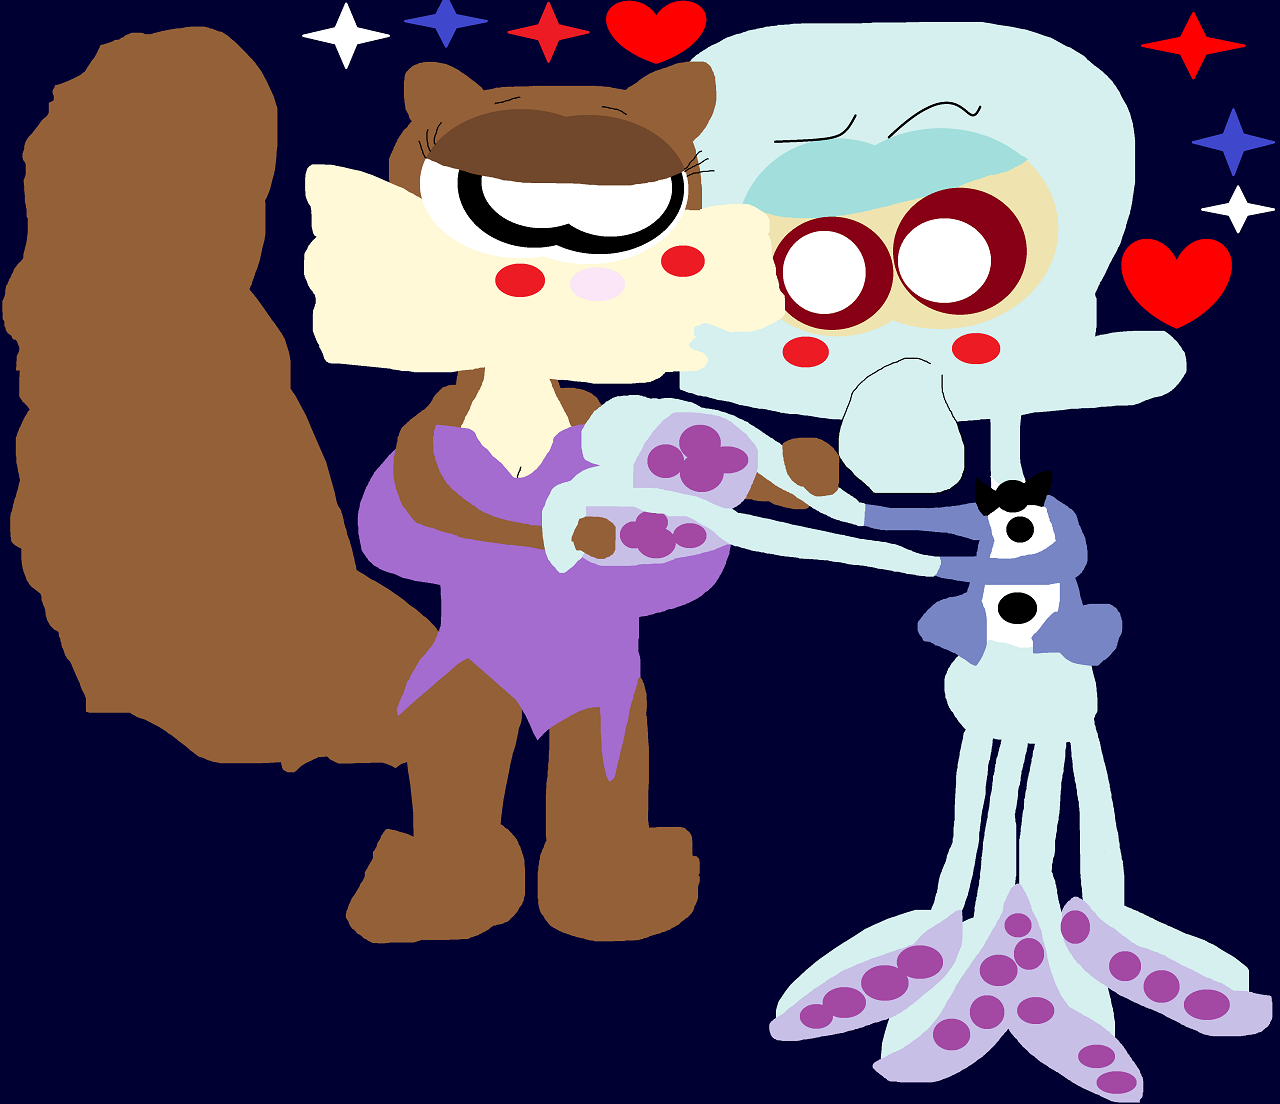 Squidward And Sandy Dancing And Kissing During Fireworks by Falconlobo